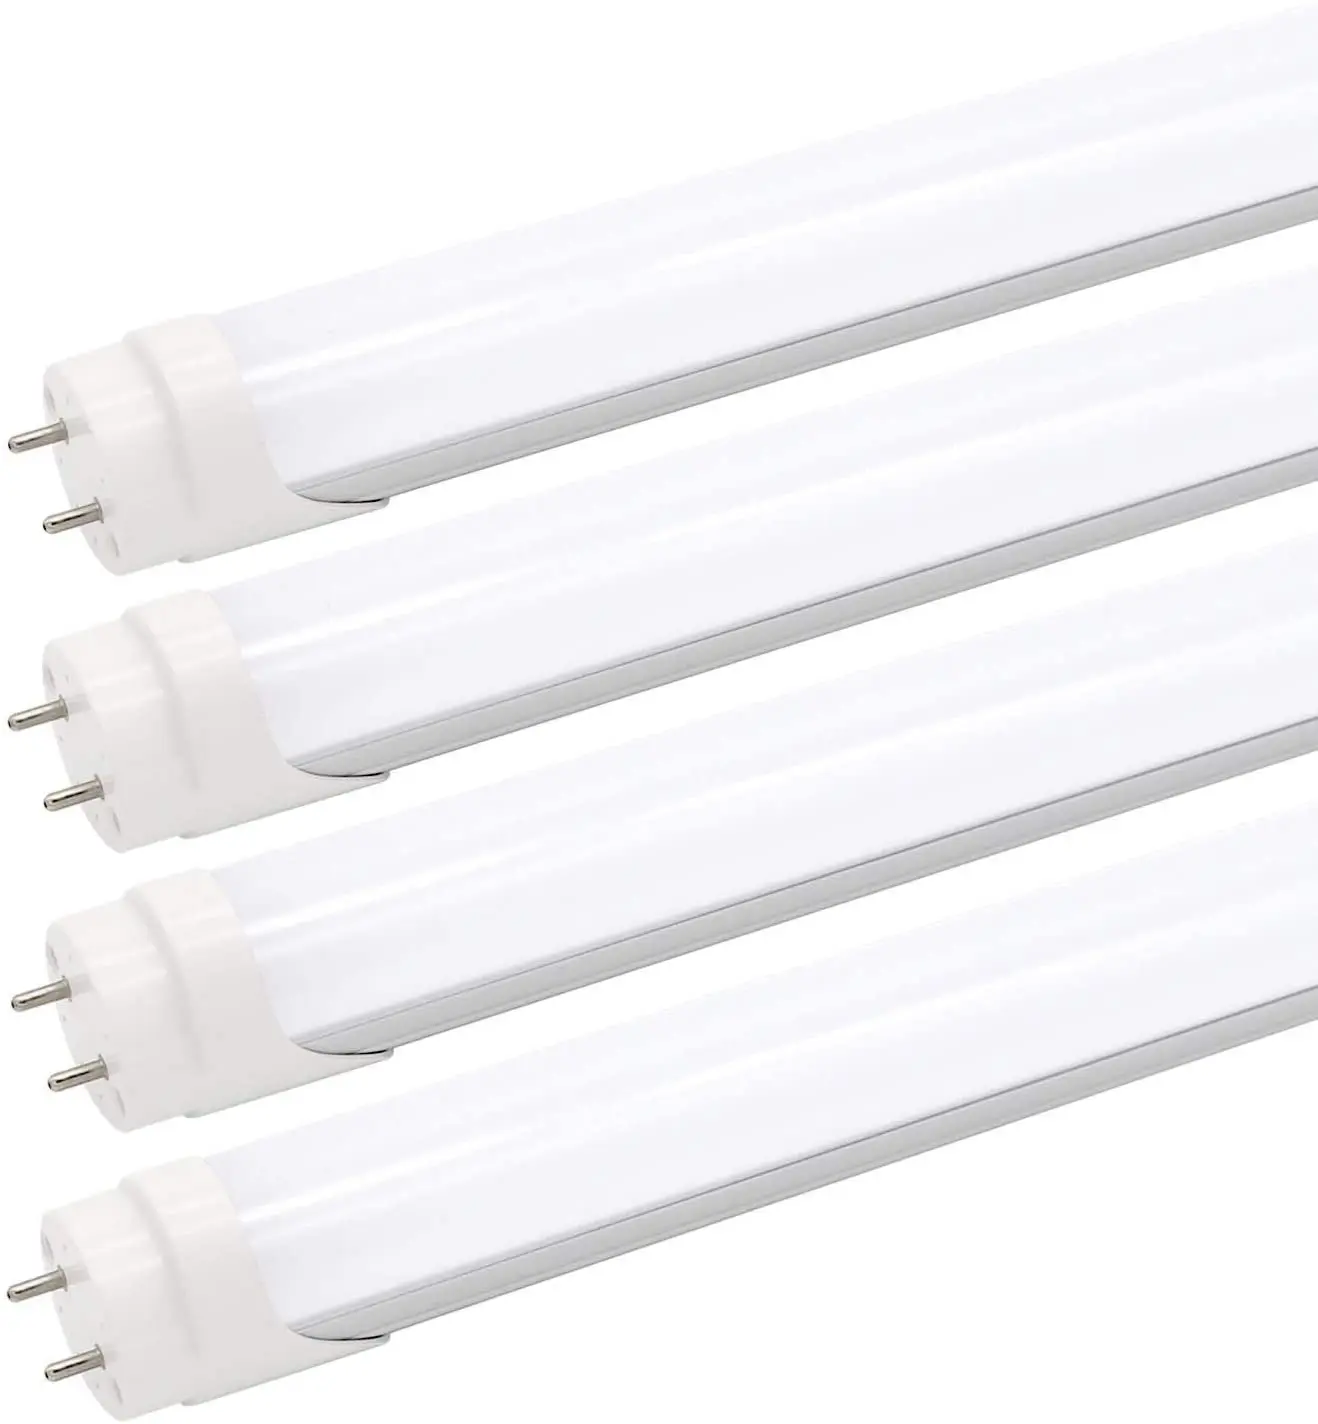 High Lumen 2ft 4ft 5ft T8 f15t8 18 inch Led Direct Wire Frosted Cover Alu and PC Led Tubes Led Fluorescent Light